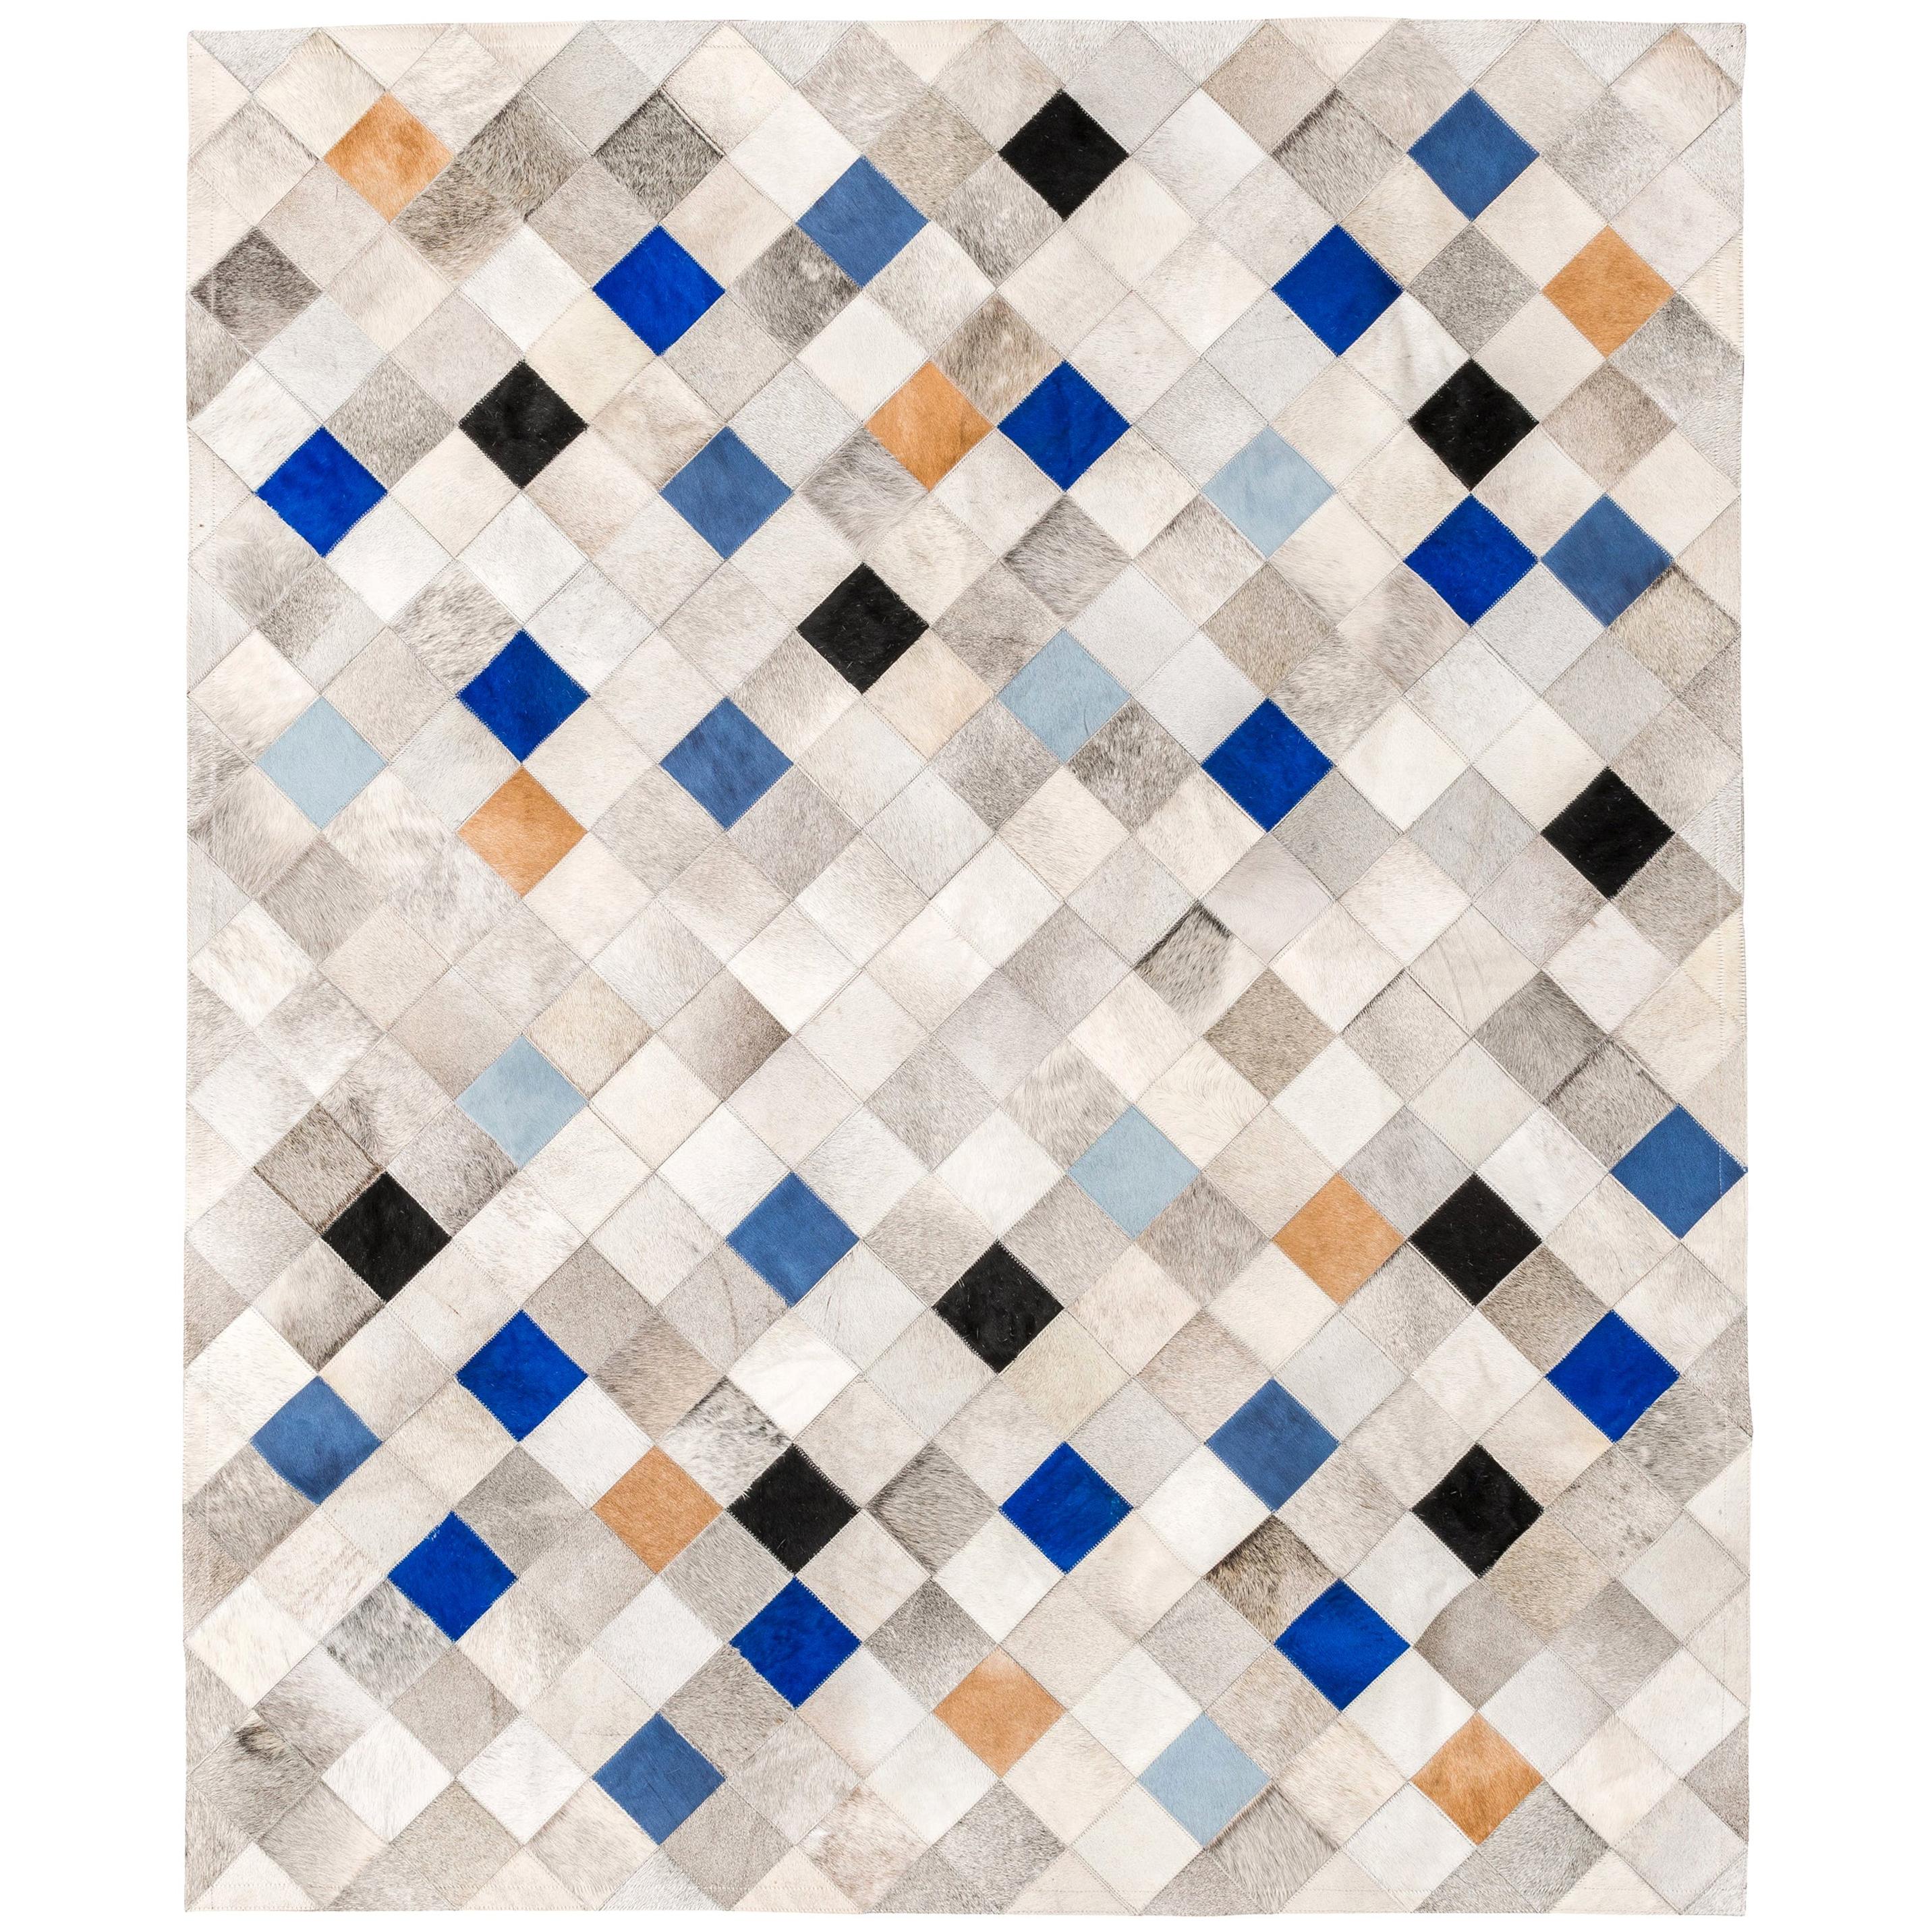 Gray, Blue and Caramel Falling Squares Cowhide Area Floor Rug X-Large